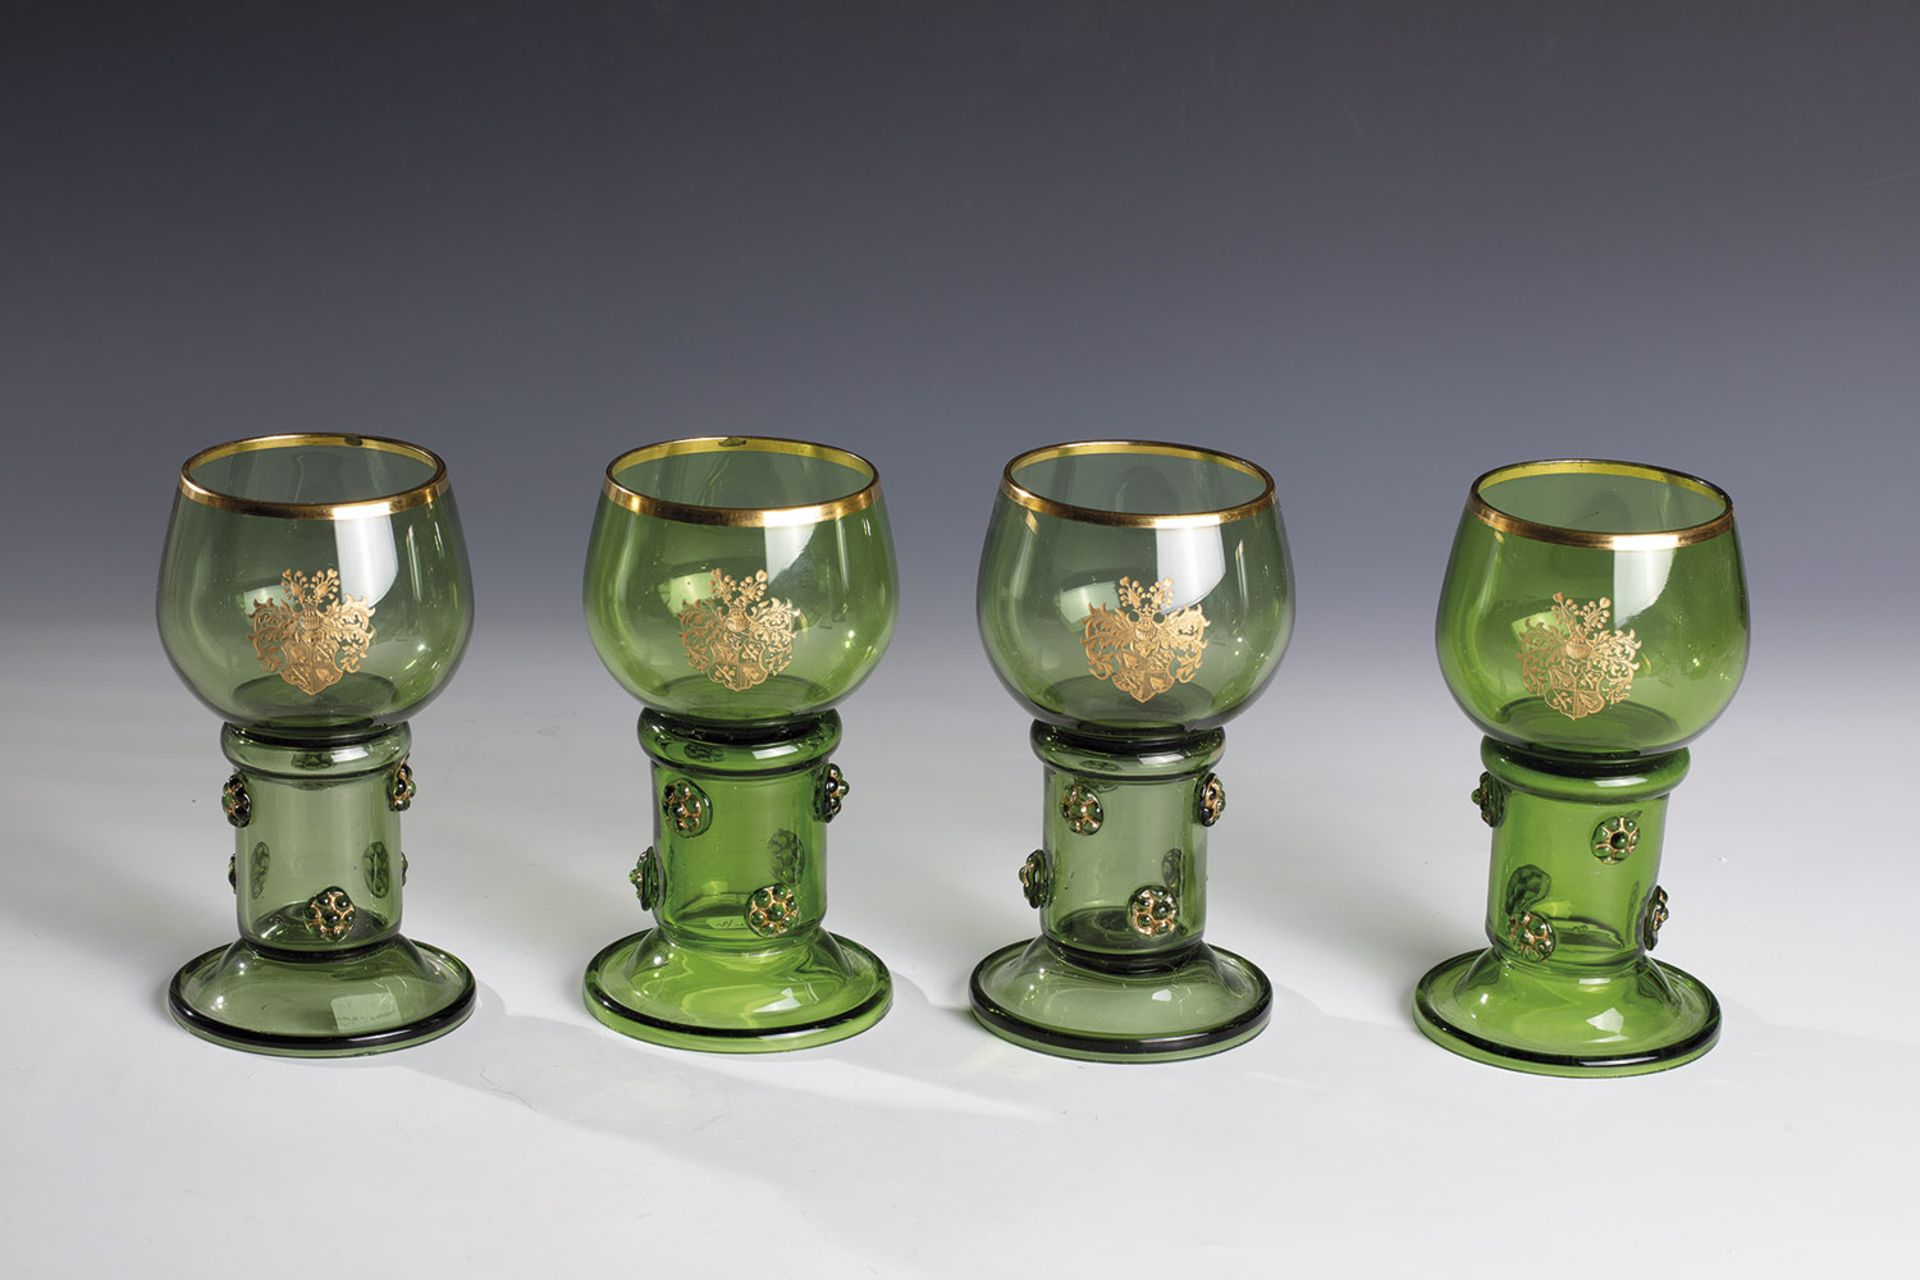 Four Romans with the coat of arms of the von Pflugk zu Rabstein, 19th century, green glass. Round